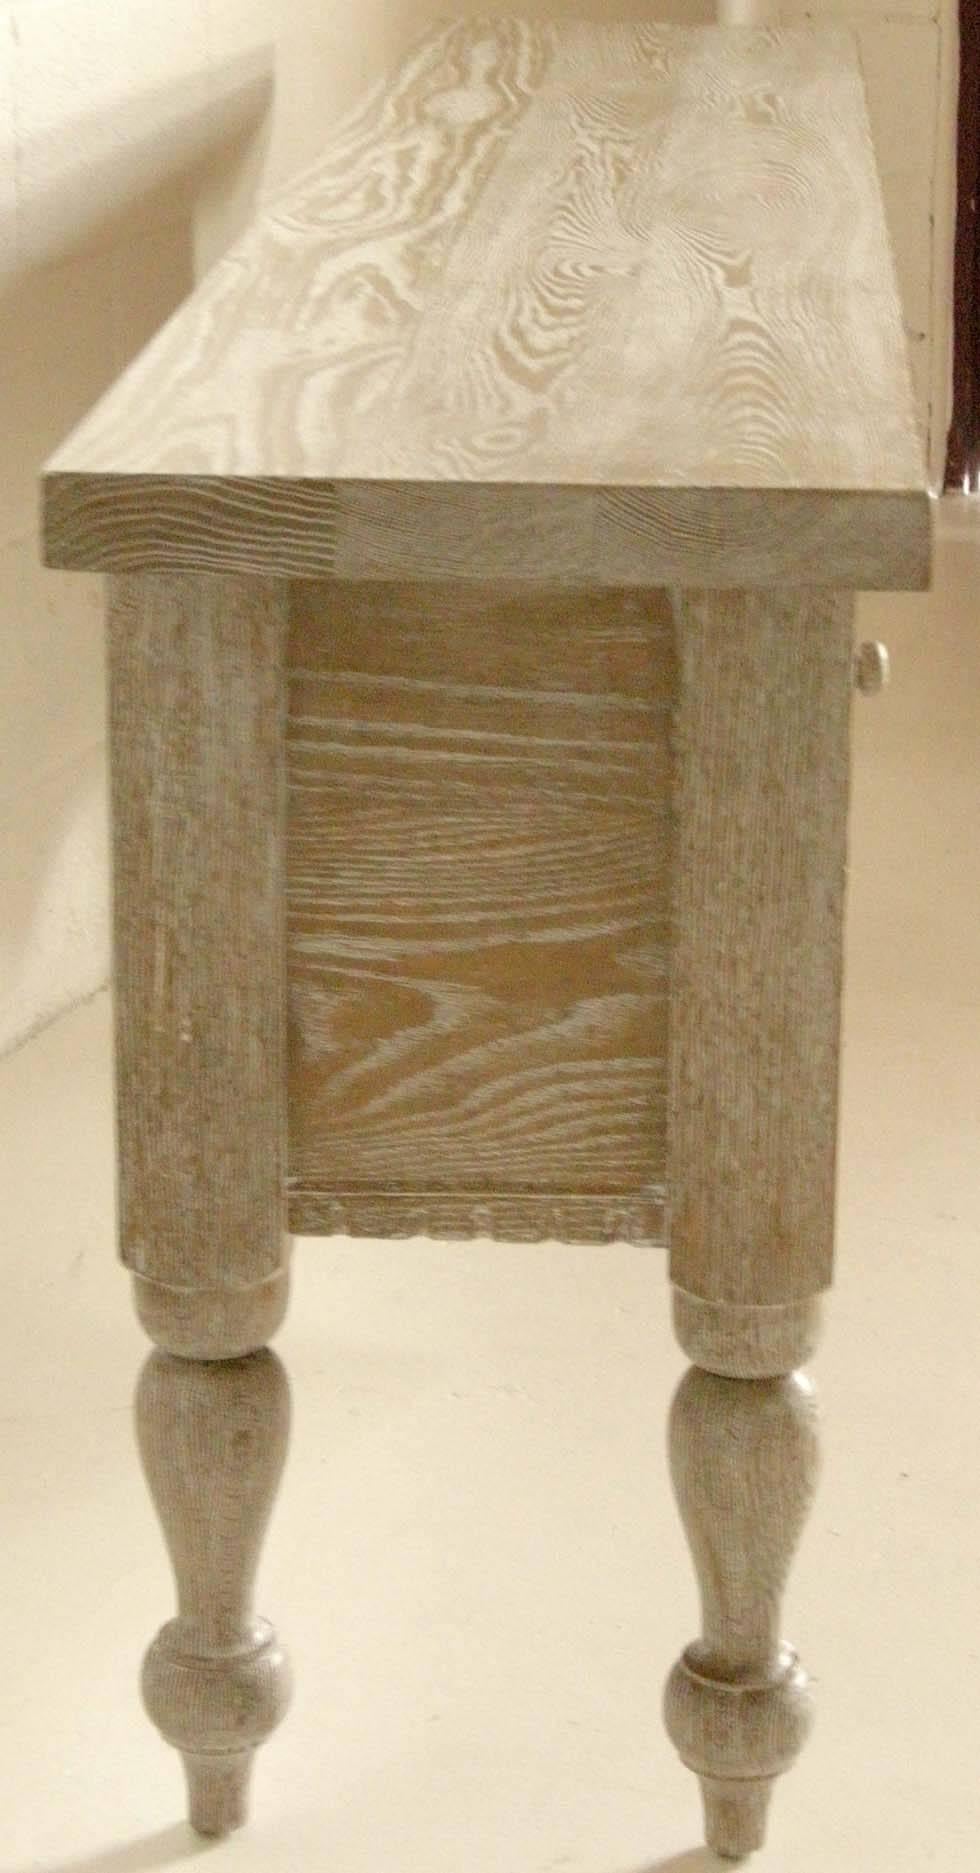 American Dos Gallos Custom Ceruse Oak Wood Carved Console With Turned Legs and Drawers For Sale